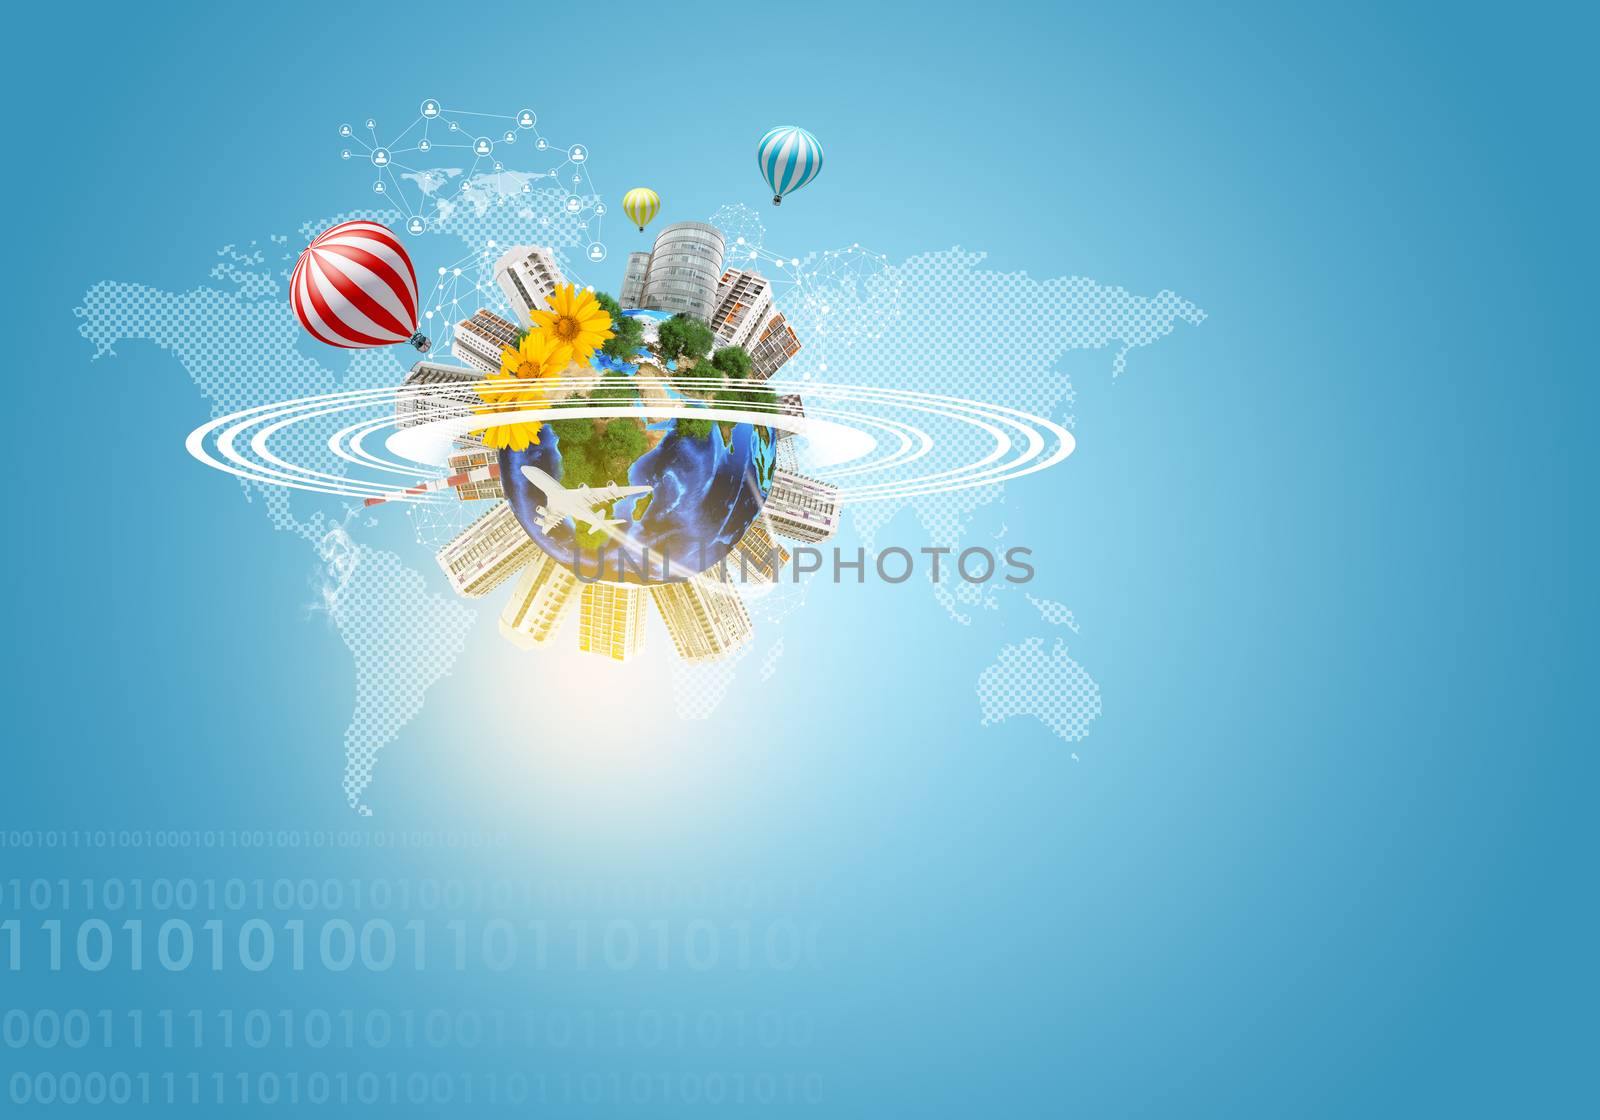 Earth with buildings, air balloons, flowers and airplane. World map and figures as backdrop. Element of this image furnished by NASA